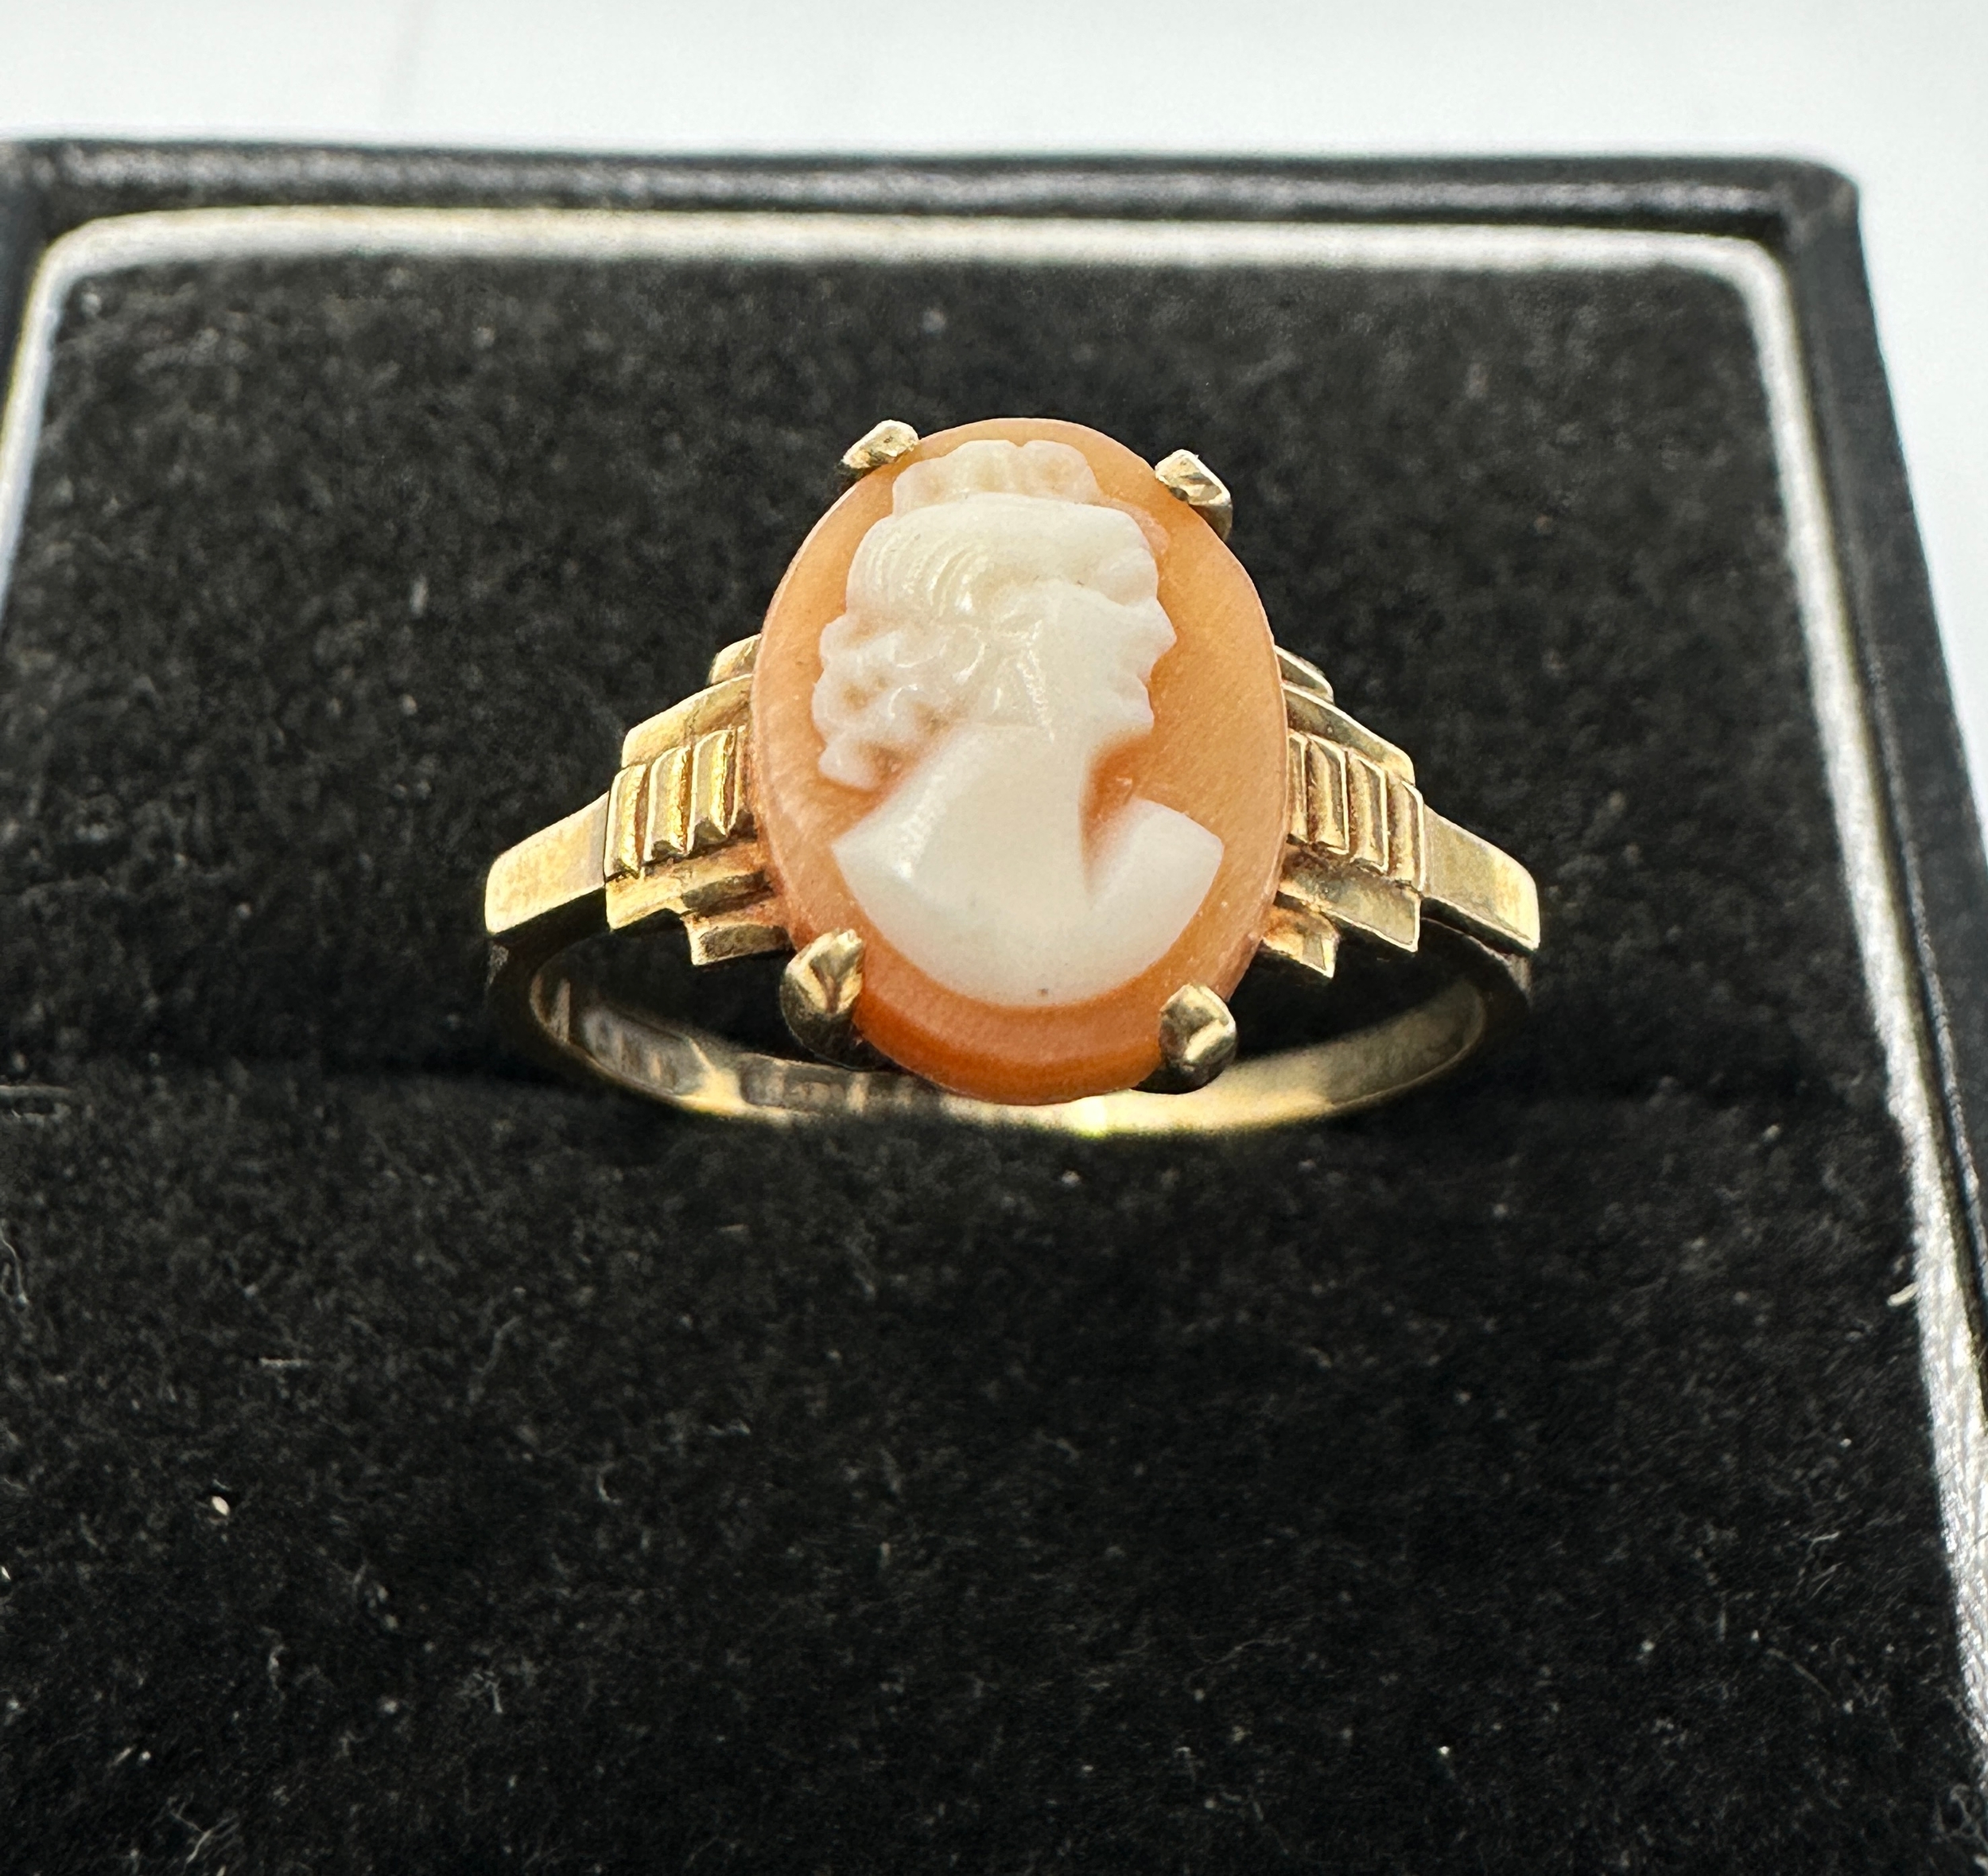 Vintage 9ct gold cameo set ring weight 1.8g